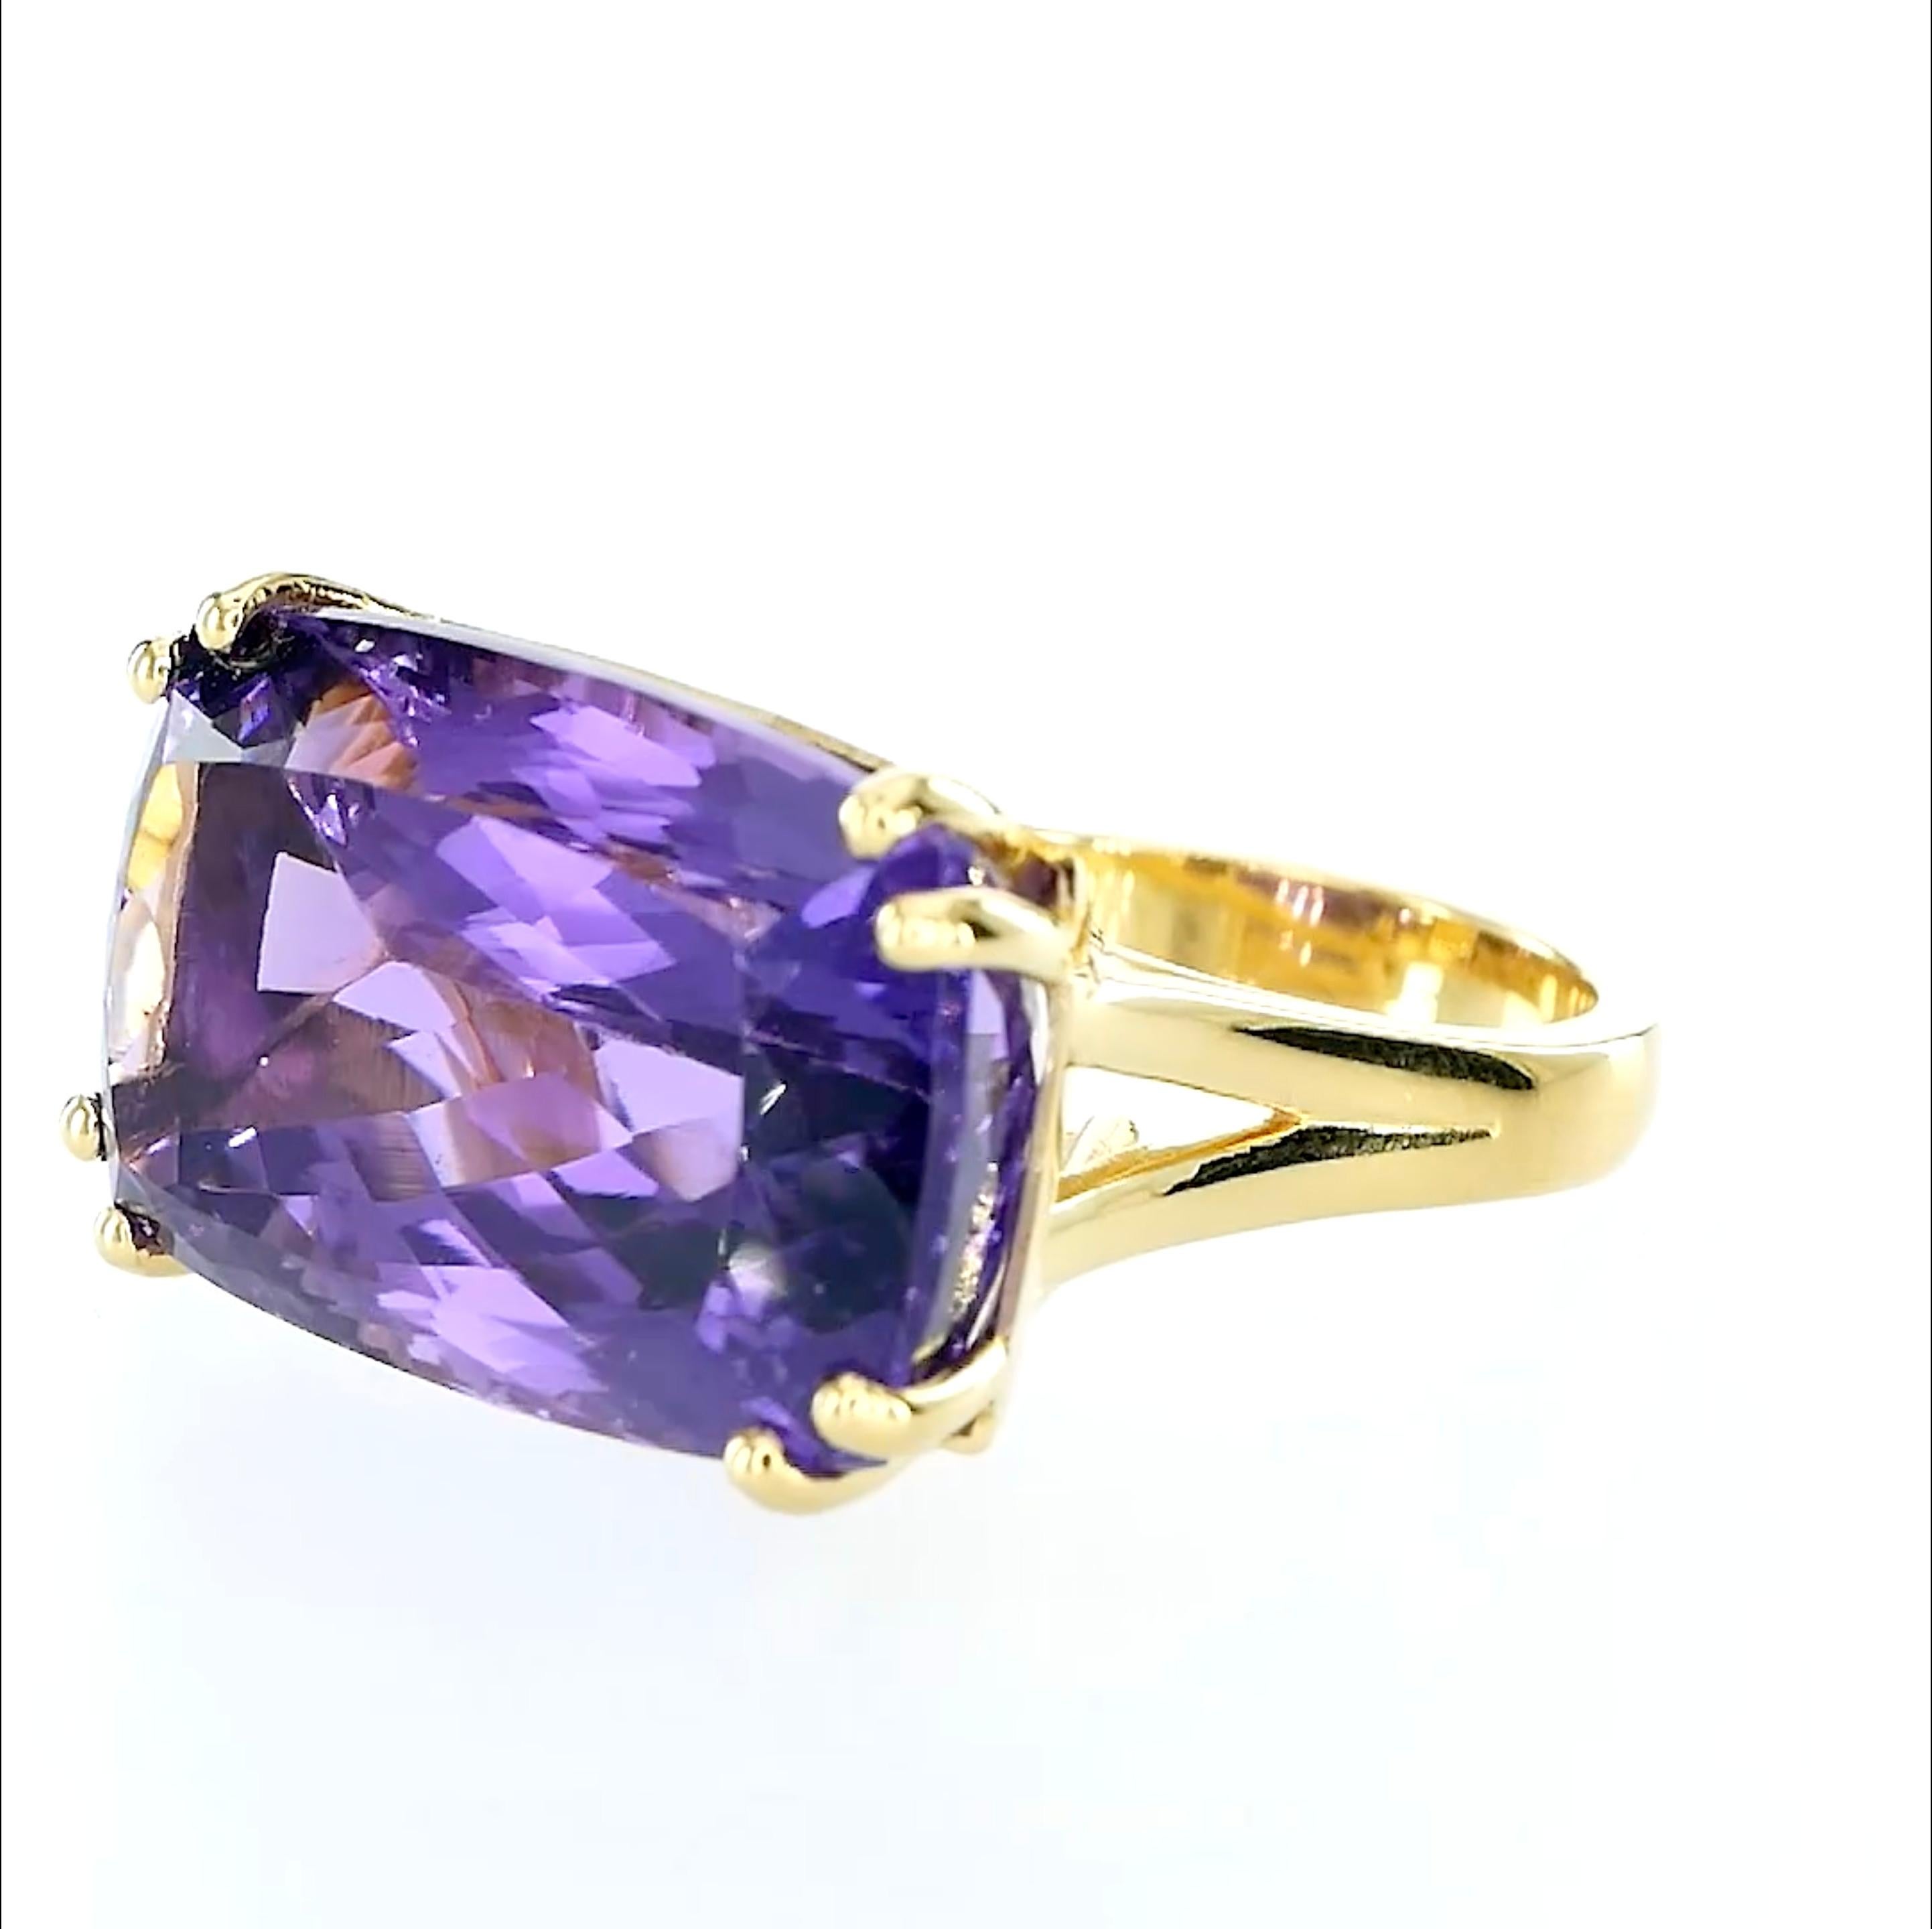 Orloff of Denmark, 32.34 ct Amethyst Cocktail Ring in 18K Gold-Plated Silver In New Condition For Sale In Hua Hin, TH